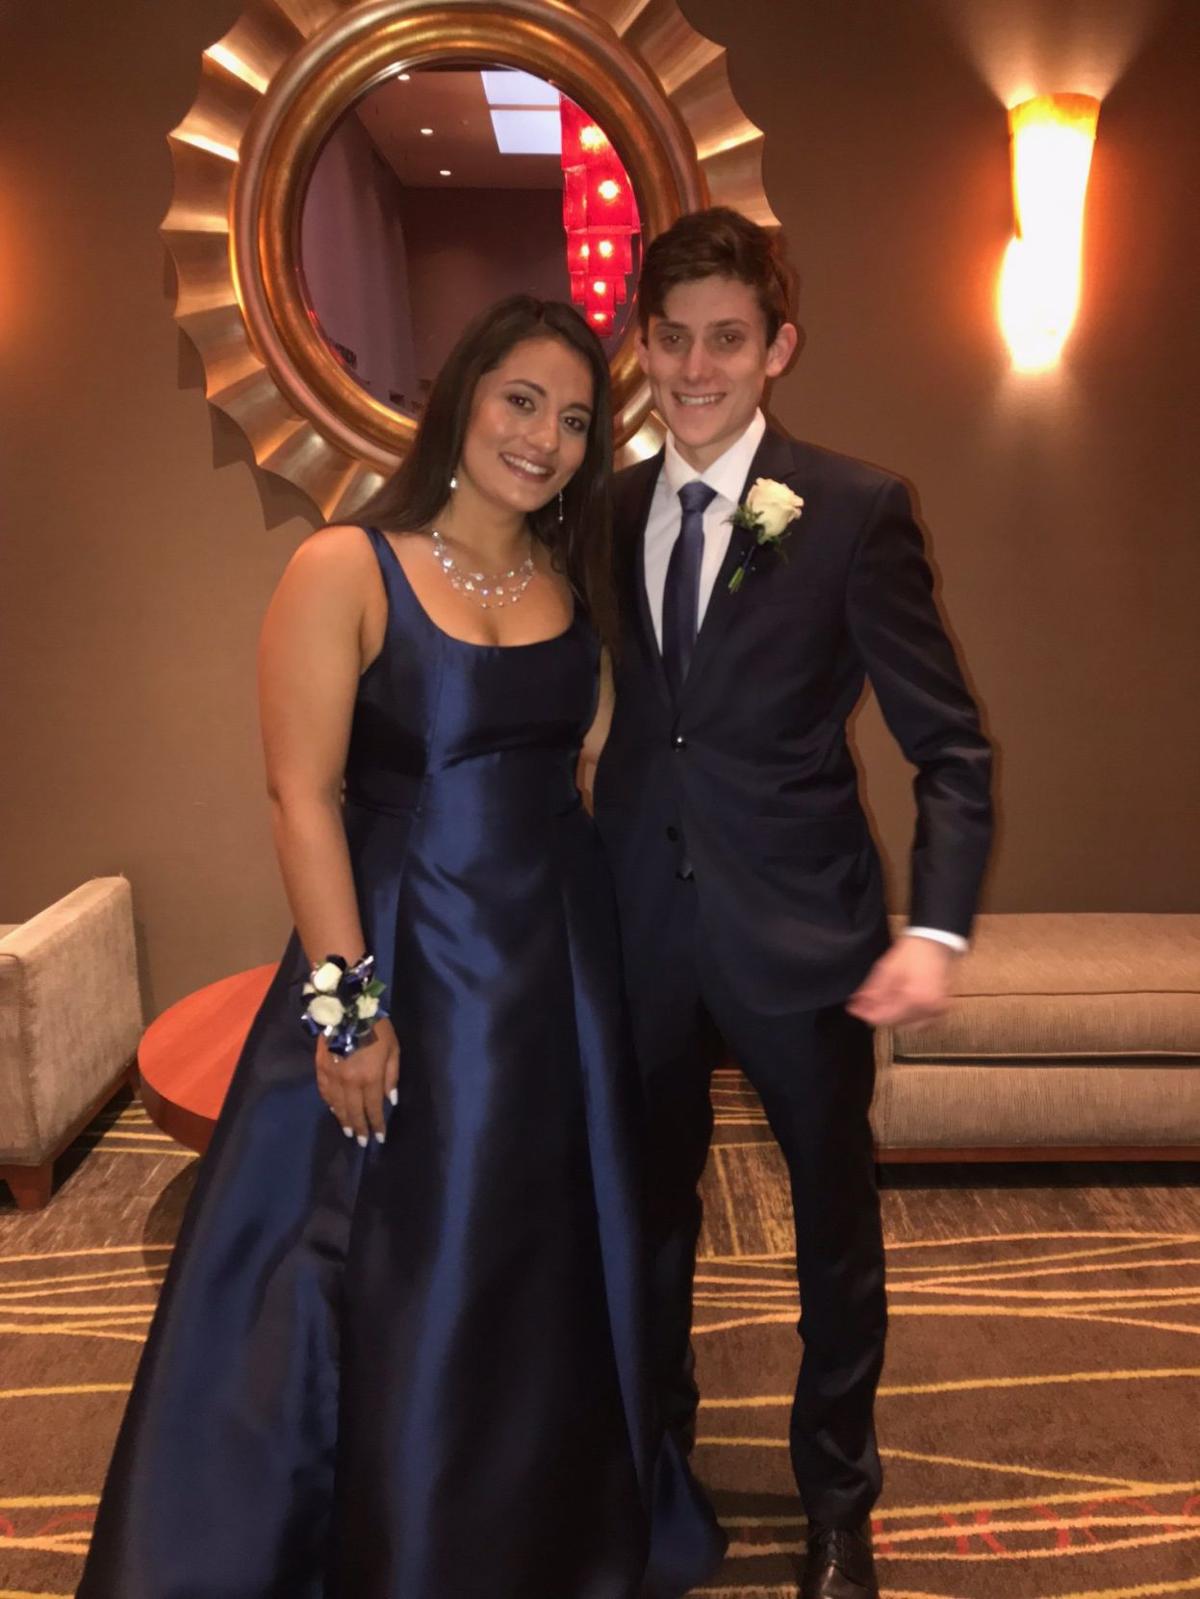 Twitter invitation lands Lincoln teen a prom date with Parkland student ...